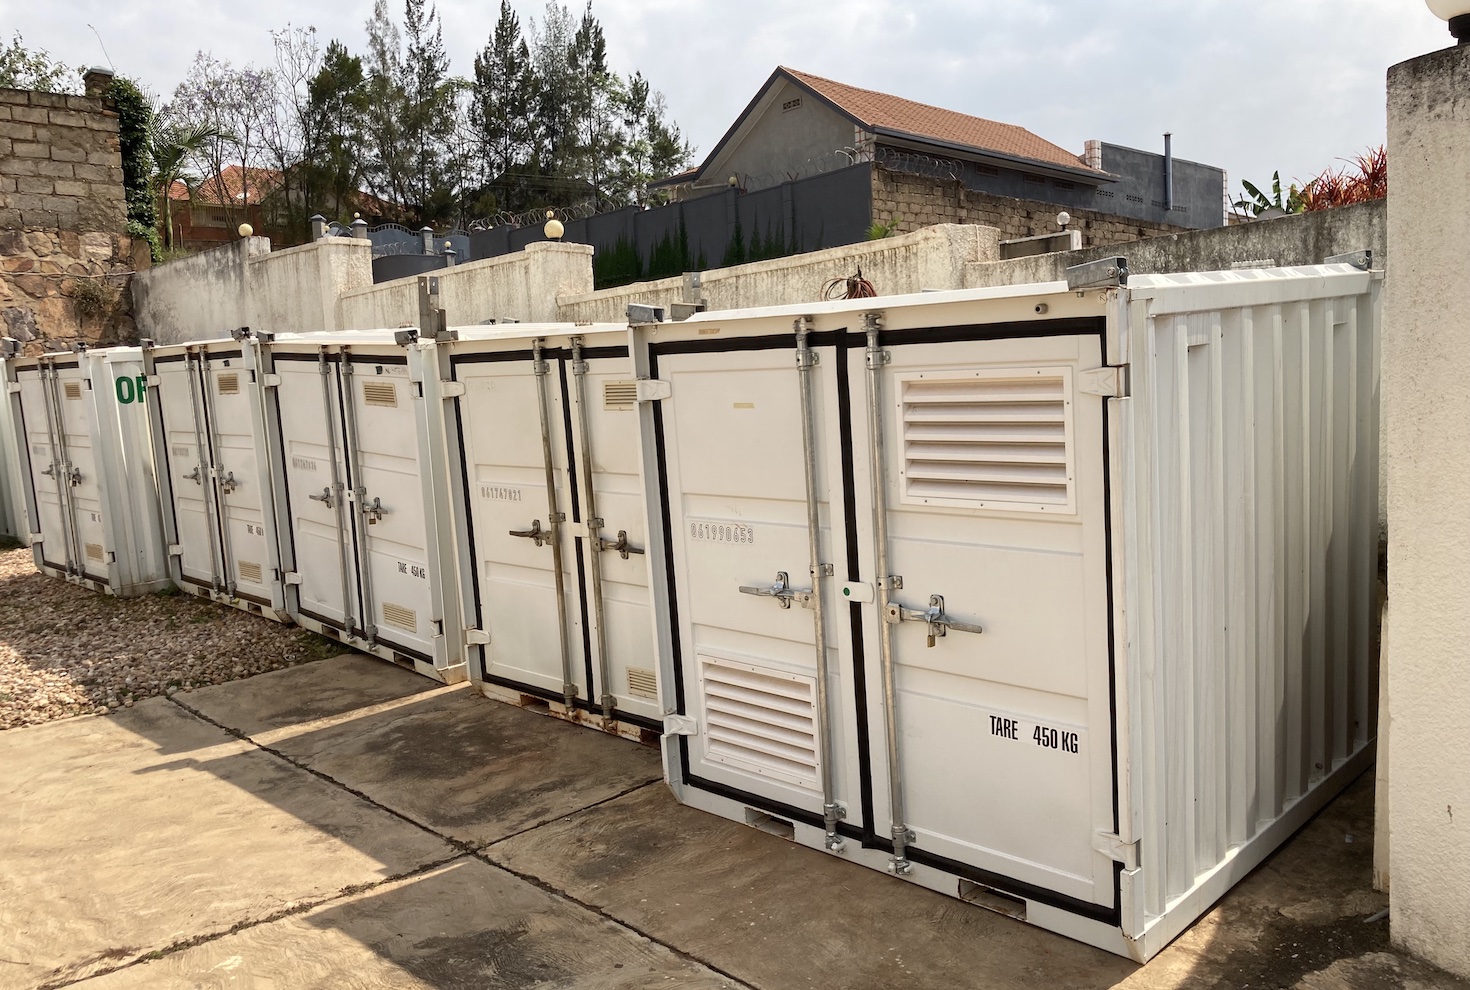 OffGridBoxes (“Boxes”) ready for deployment at the Rwandan headquarters. 